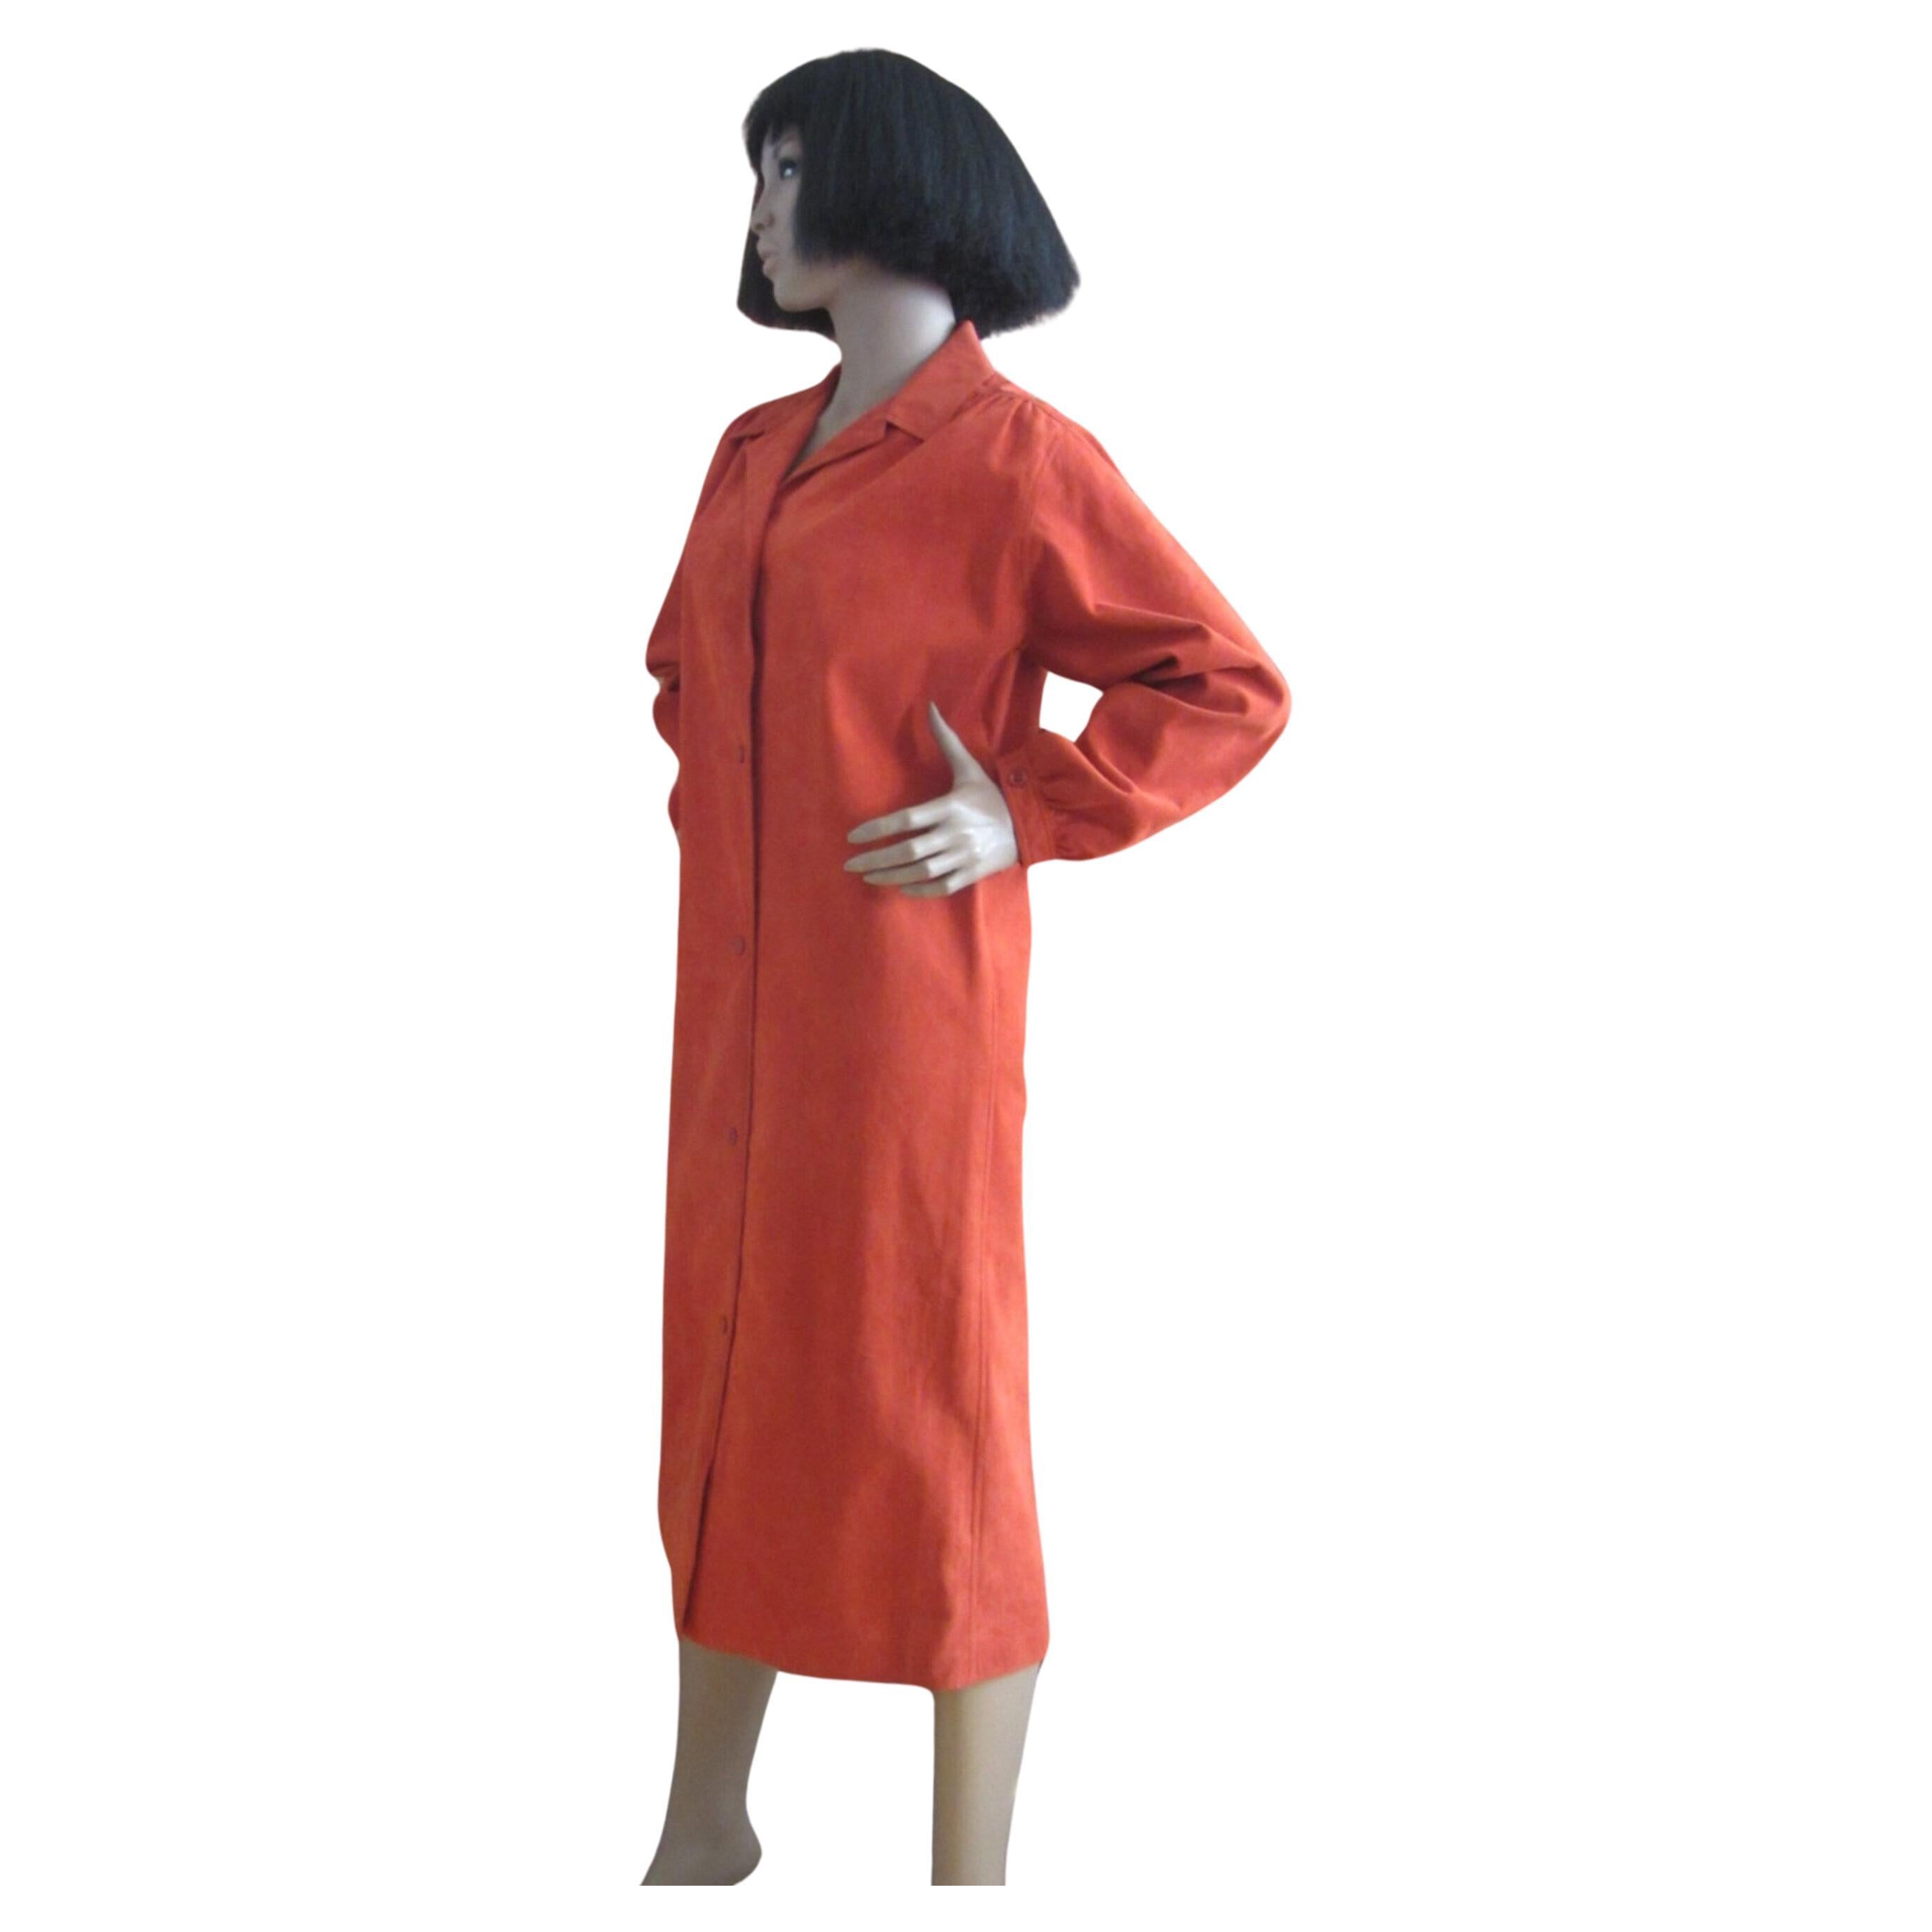 Iconic vintage Halston ultrasuede shirt dress. notch collar. long sleeves. loose fitting silhouette. 5 button closure.

✩ Roy Halston is credited with bringing the ultrasuede fabric into fashion favor in the 1970's and his ultrasuede collection was